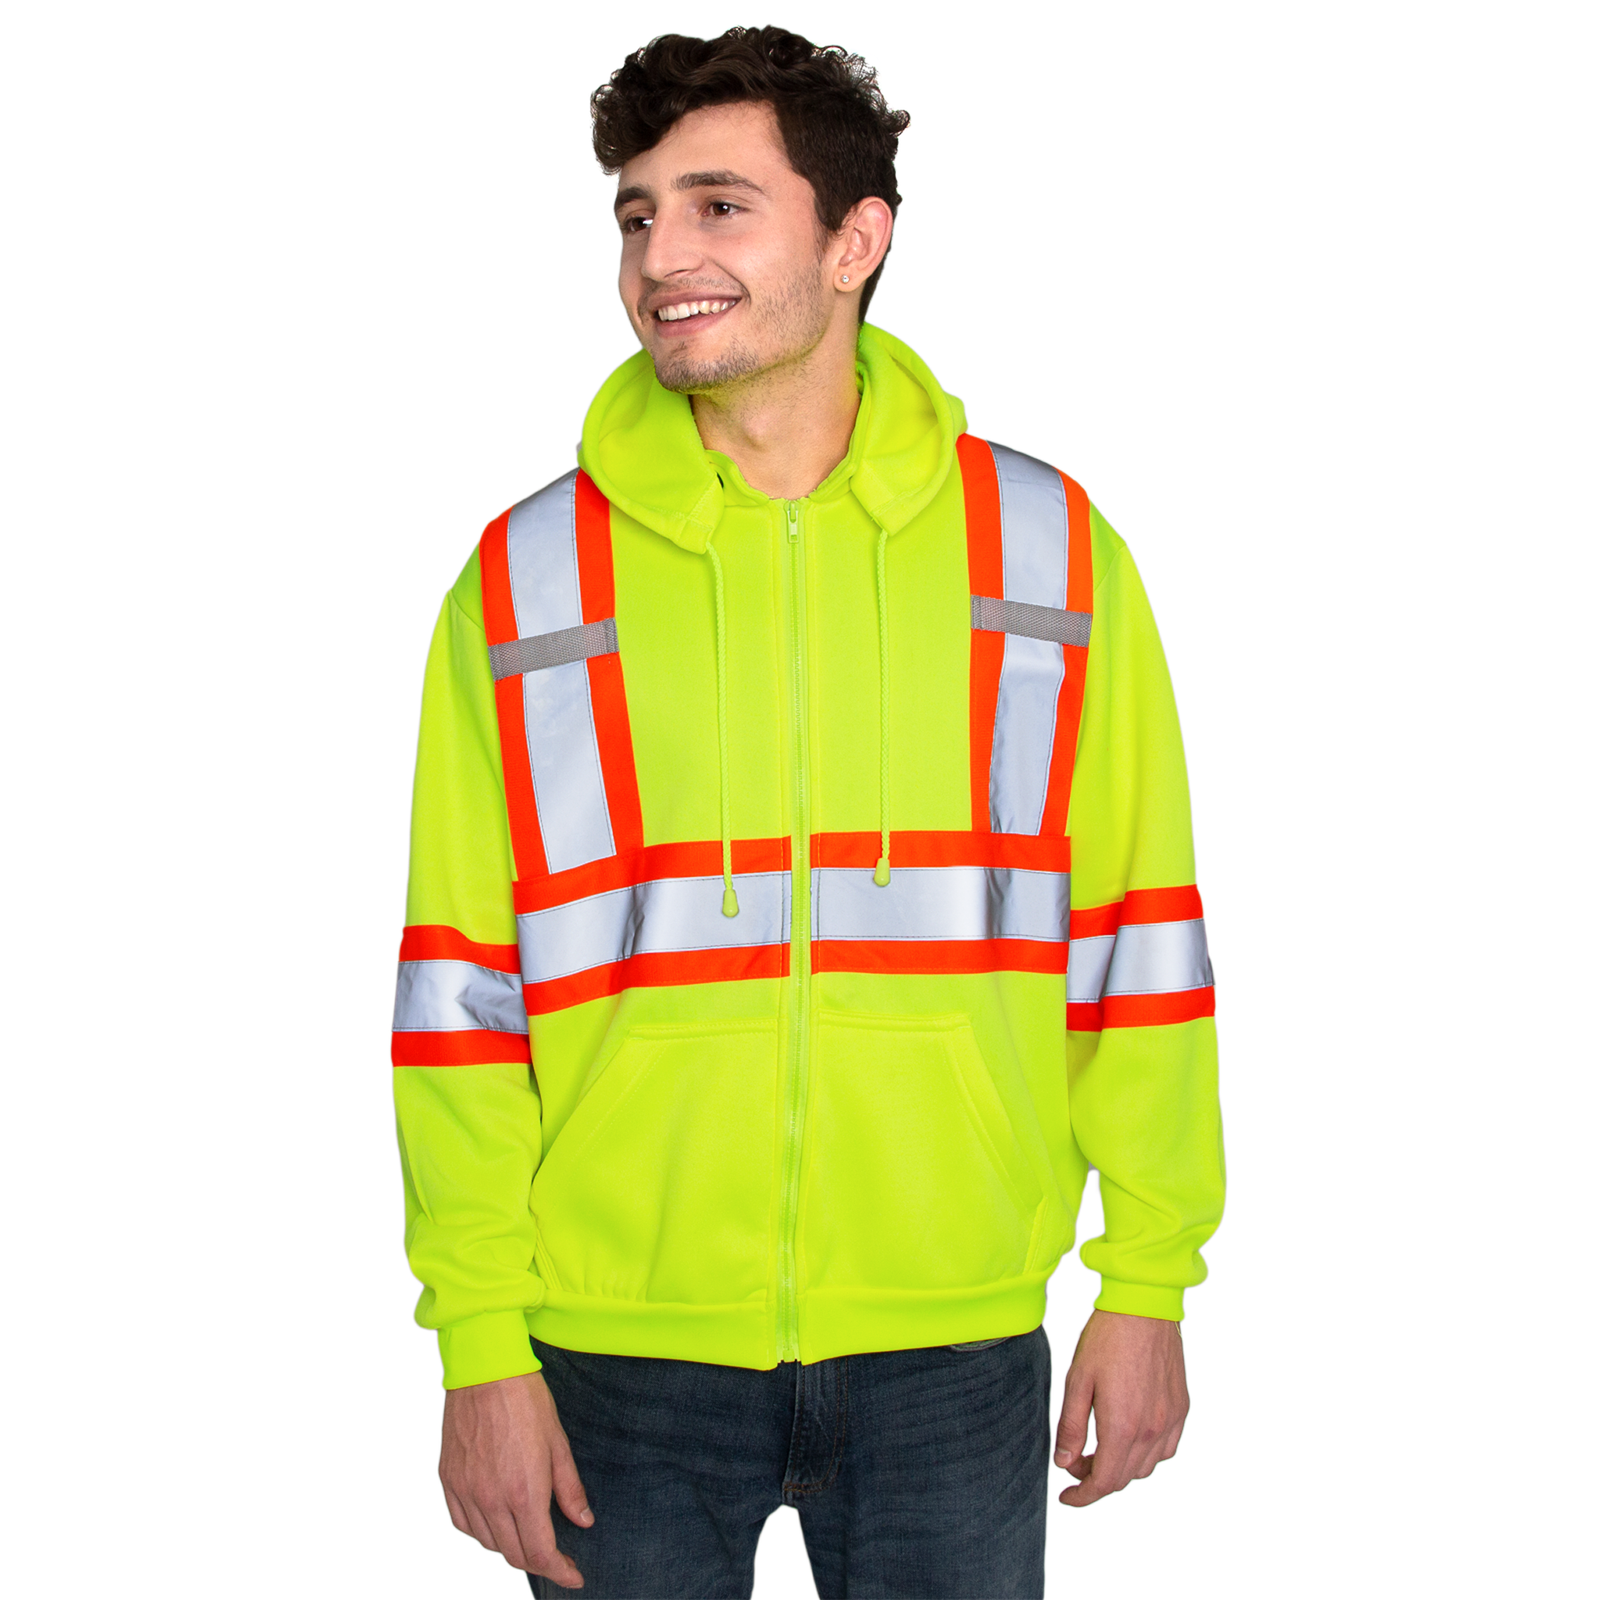 Man wearing the yellow JORESTECH hi vis sweater with reflective and orange contracting stripes.